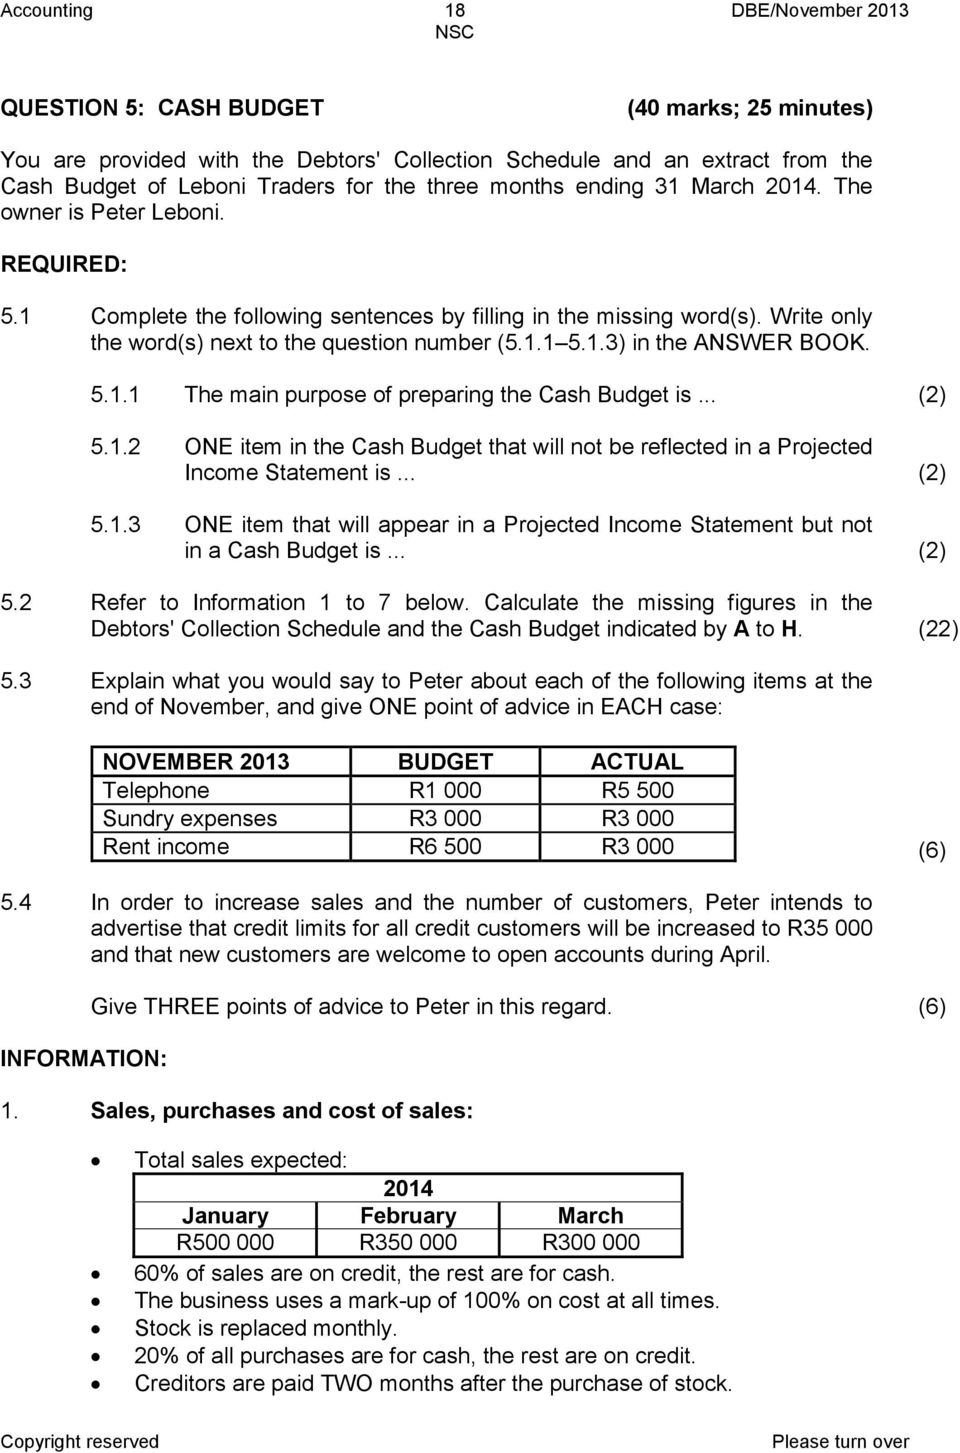 1.3) in the ANSWER BOOK. 5.1.1 The main purpose of preparing the Cash Budget is... (2) 5.1.2 ONE item in the Cash Budget that will not be reflected in a Projected Income Statement is... (2) 5.1.3 ONE item that will appear in a Projected Income Statement but not in a Cash Budget is.